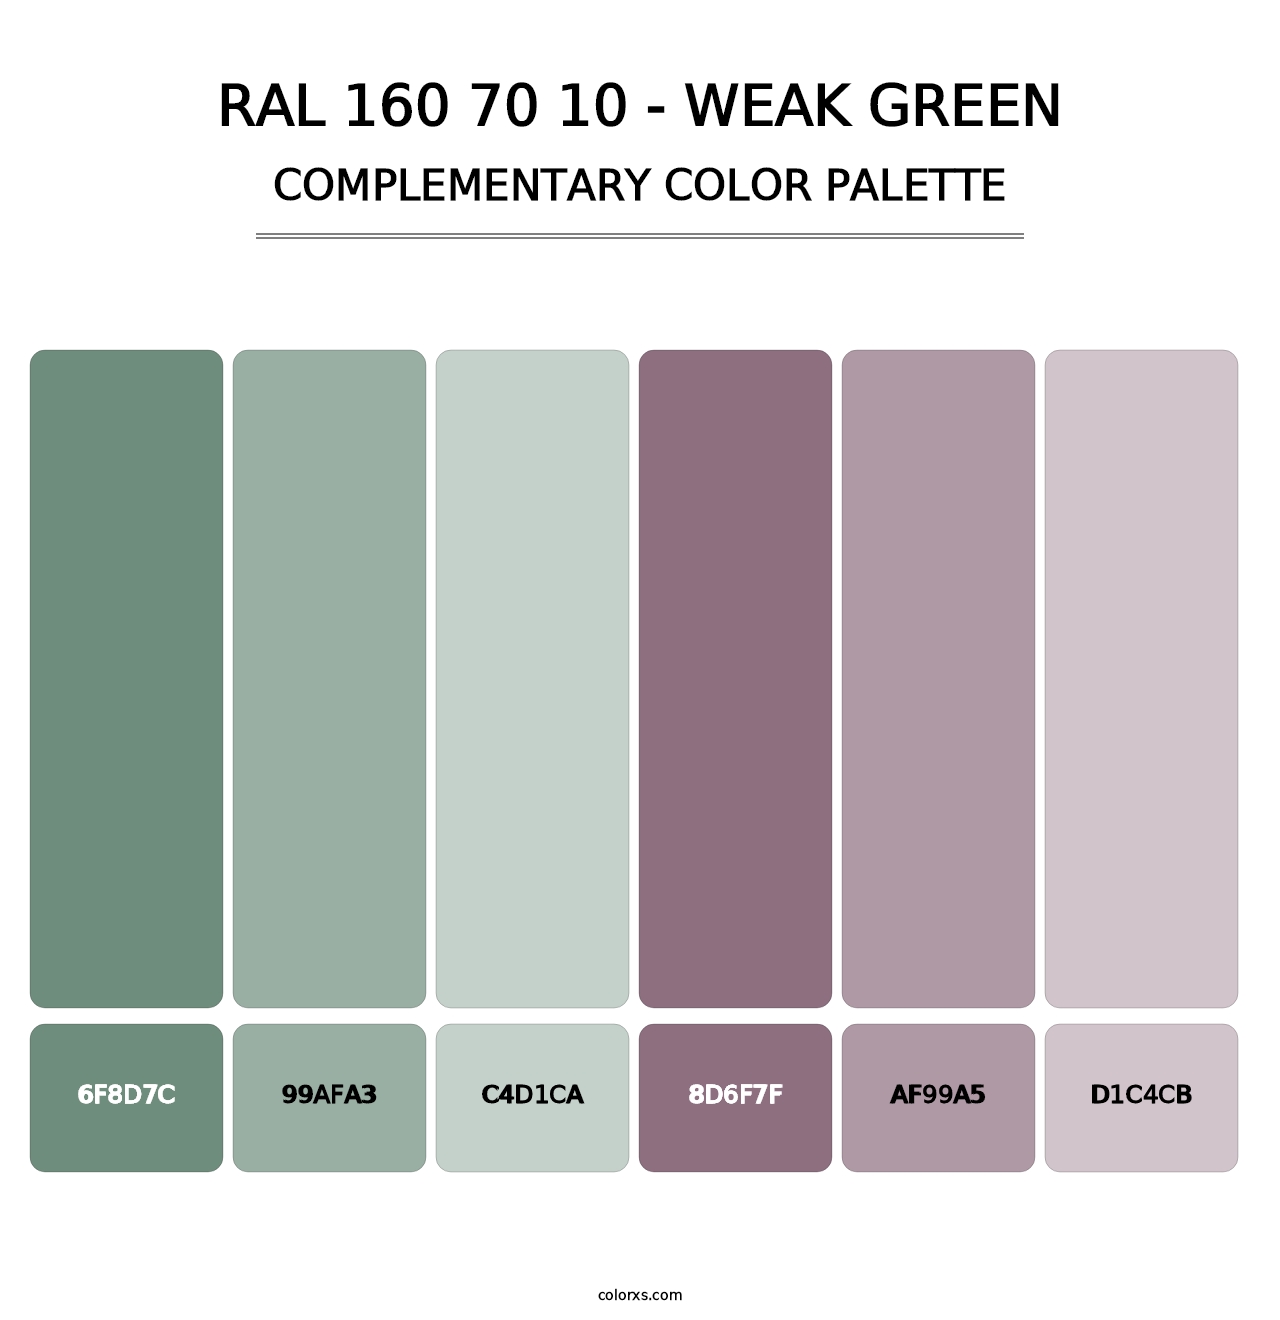 RAL 160 70 10 - Weak Green - Complementary Color Palette